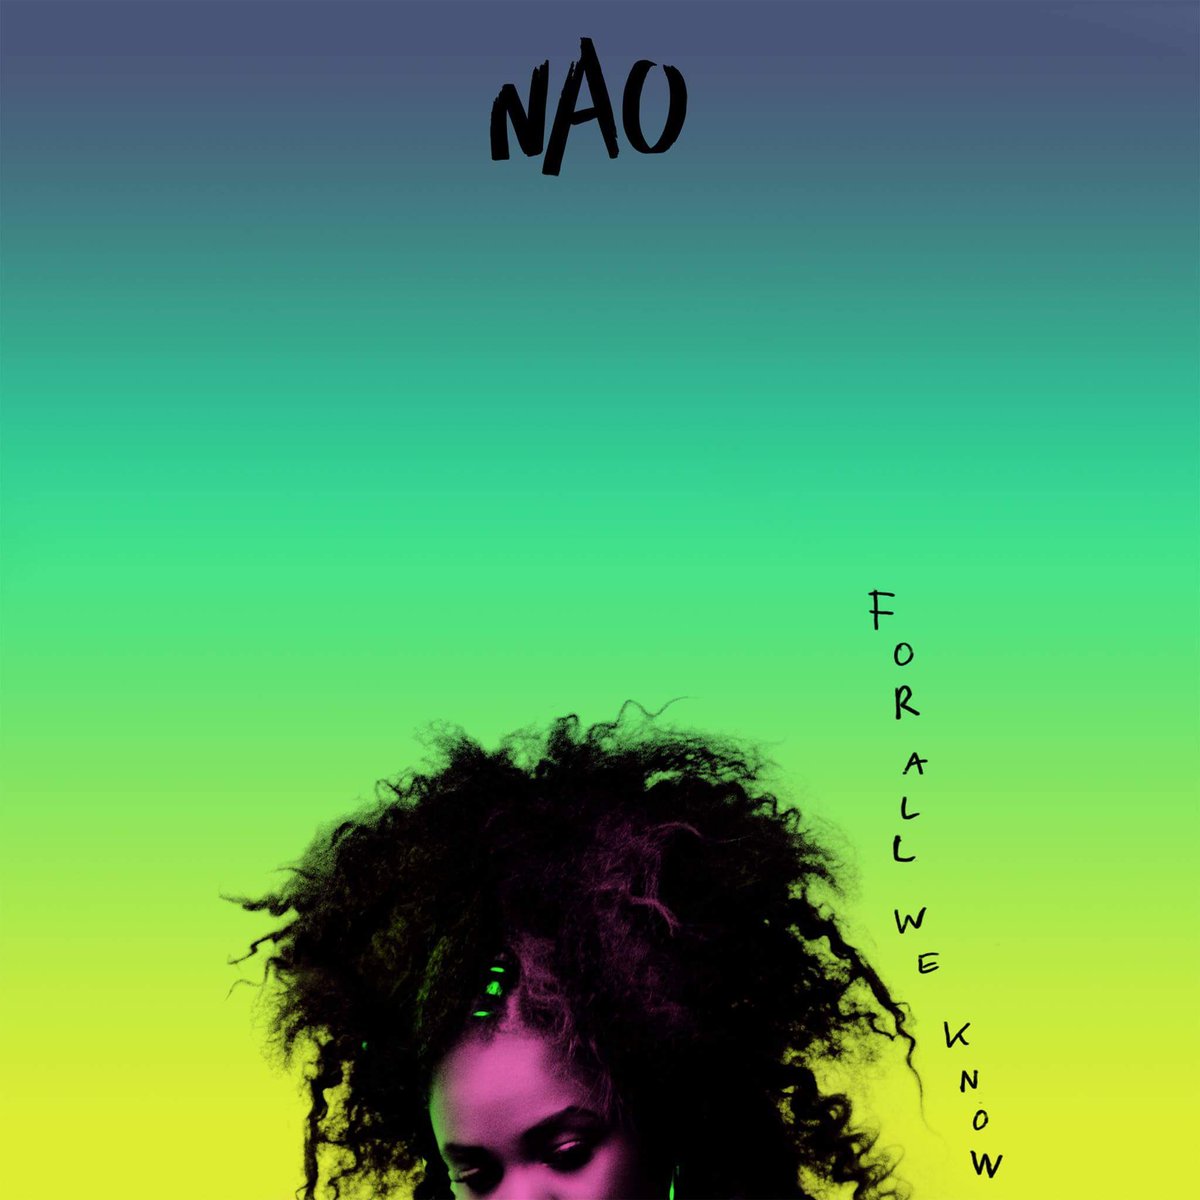 ❤ @thisNAO 'Bad Blood' right now ???? https://t.co/IAGsj2lONT https://t.co/6DYfkwgIln